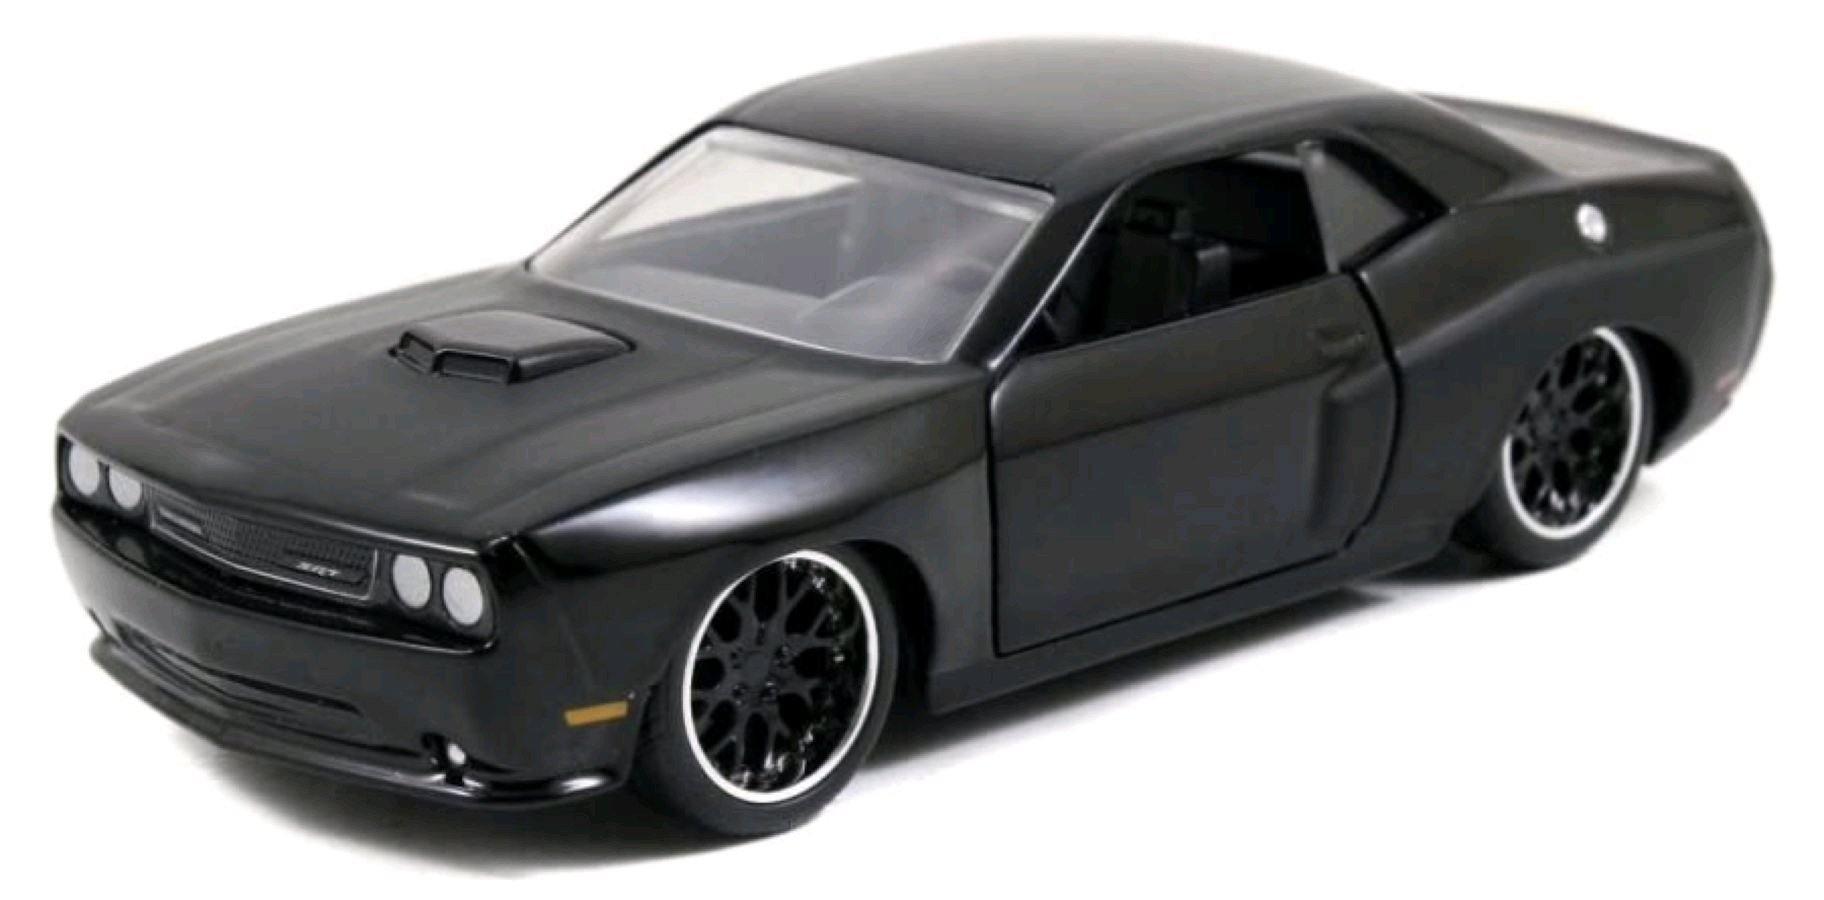 Fast and Furious - 2012 Dodge Challenger SRT8 1:32 Scale Hollywood Ride  Jada Toys Titan Pop Culture